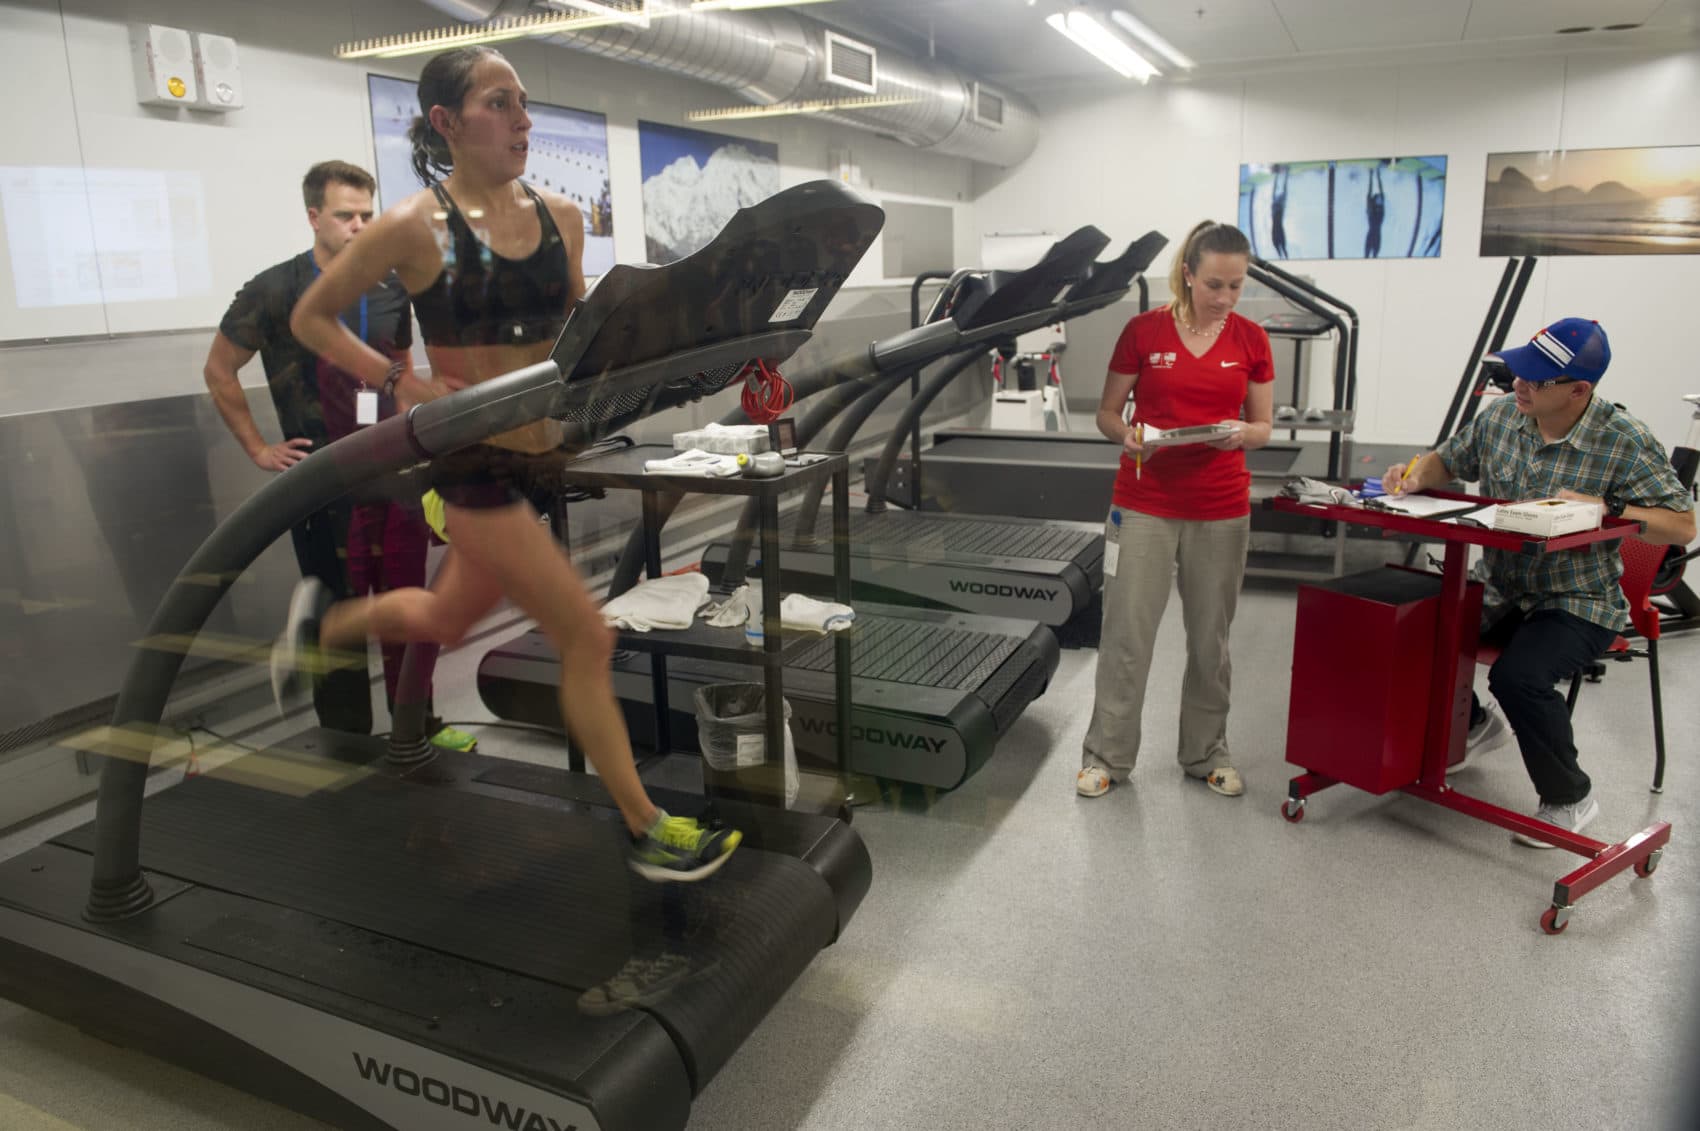 Linden runs inside the High-Altitude Training Center in preparation for the 2016 Rio Olympic games. (Jason Connolly/AFP/Getty Images)